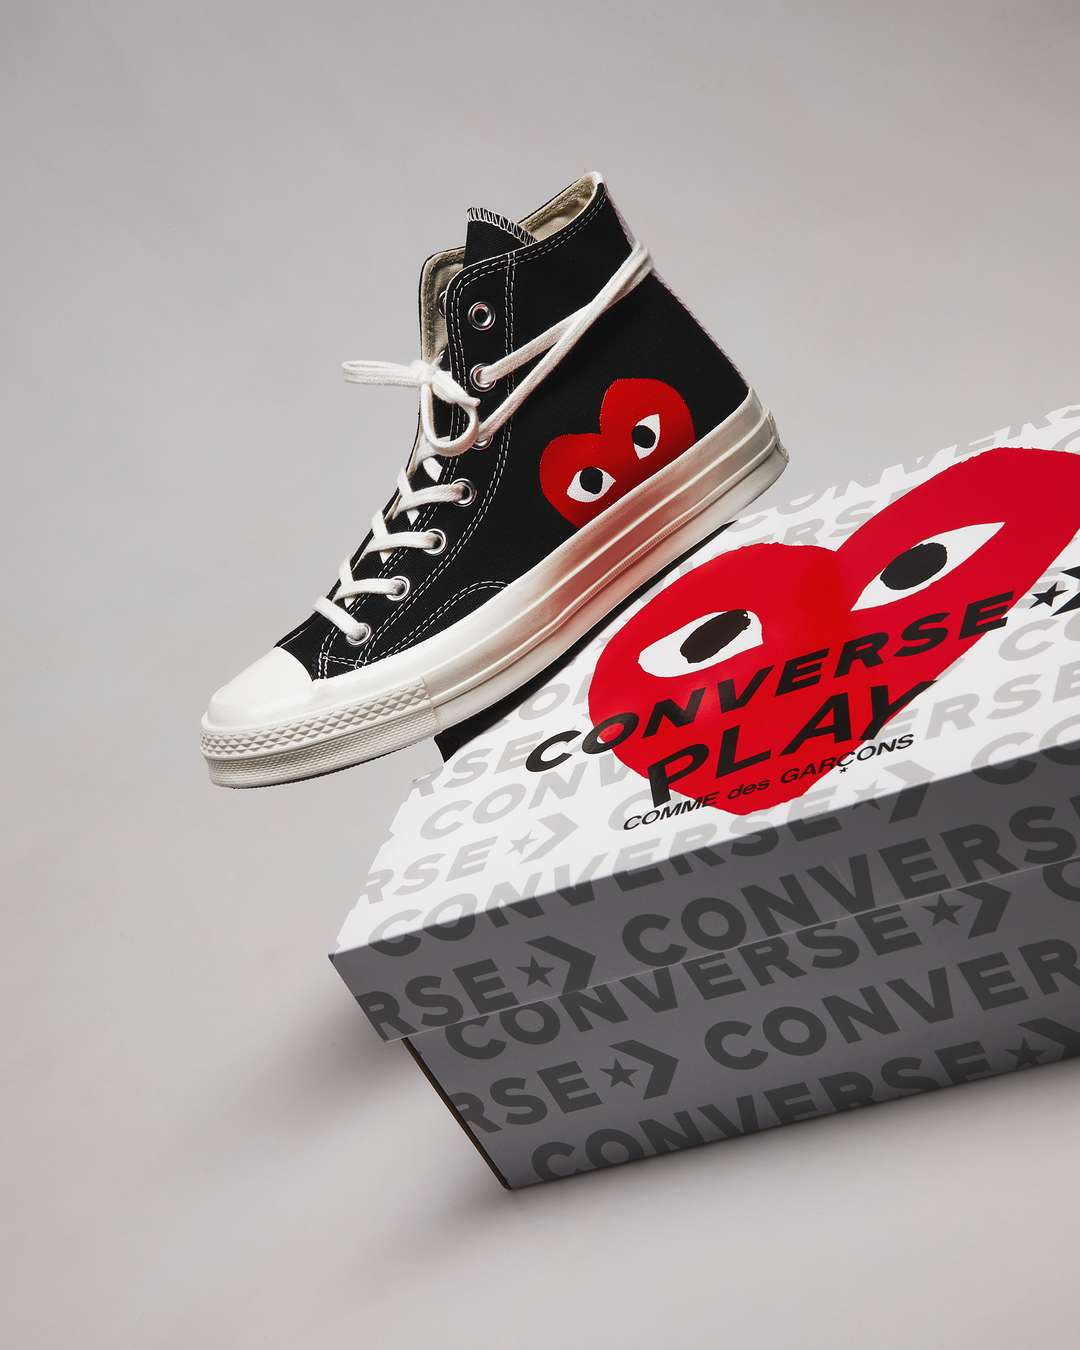 END. on Twitter: "One of the most sought-after sneaker collaborations, Converse and Comme des Garçons PLAY's Chuck Taylor is online -- https://t.co/c95u2cpQLA https://t.co/FVwb8pmWTC" / X